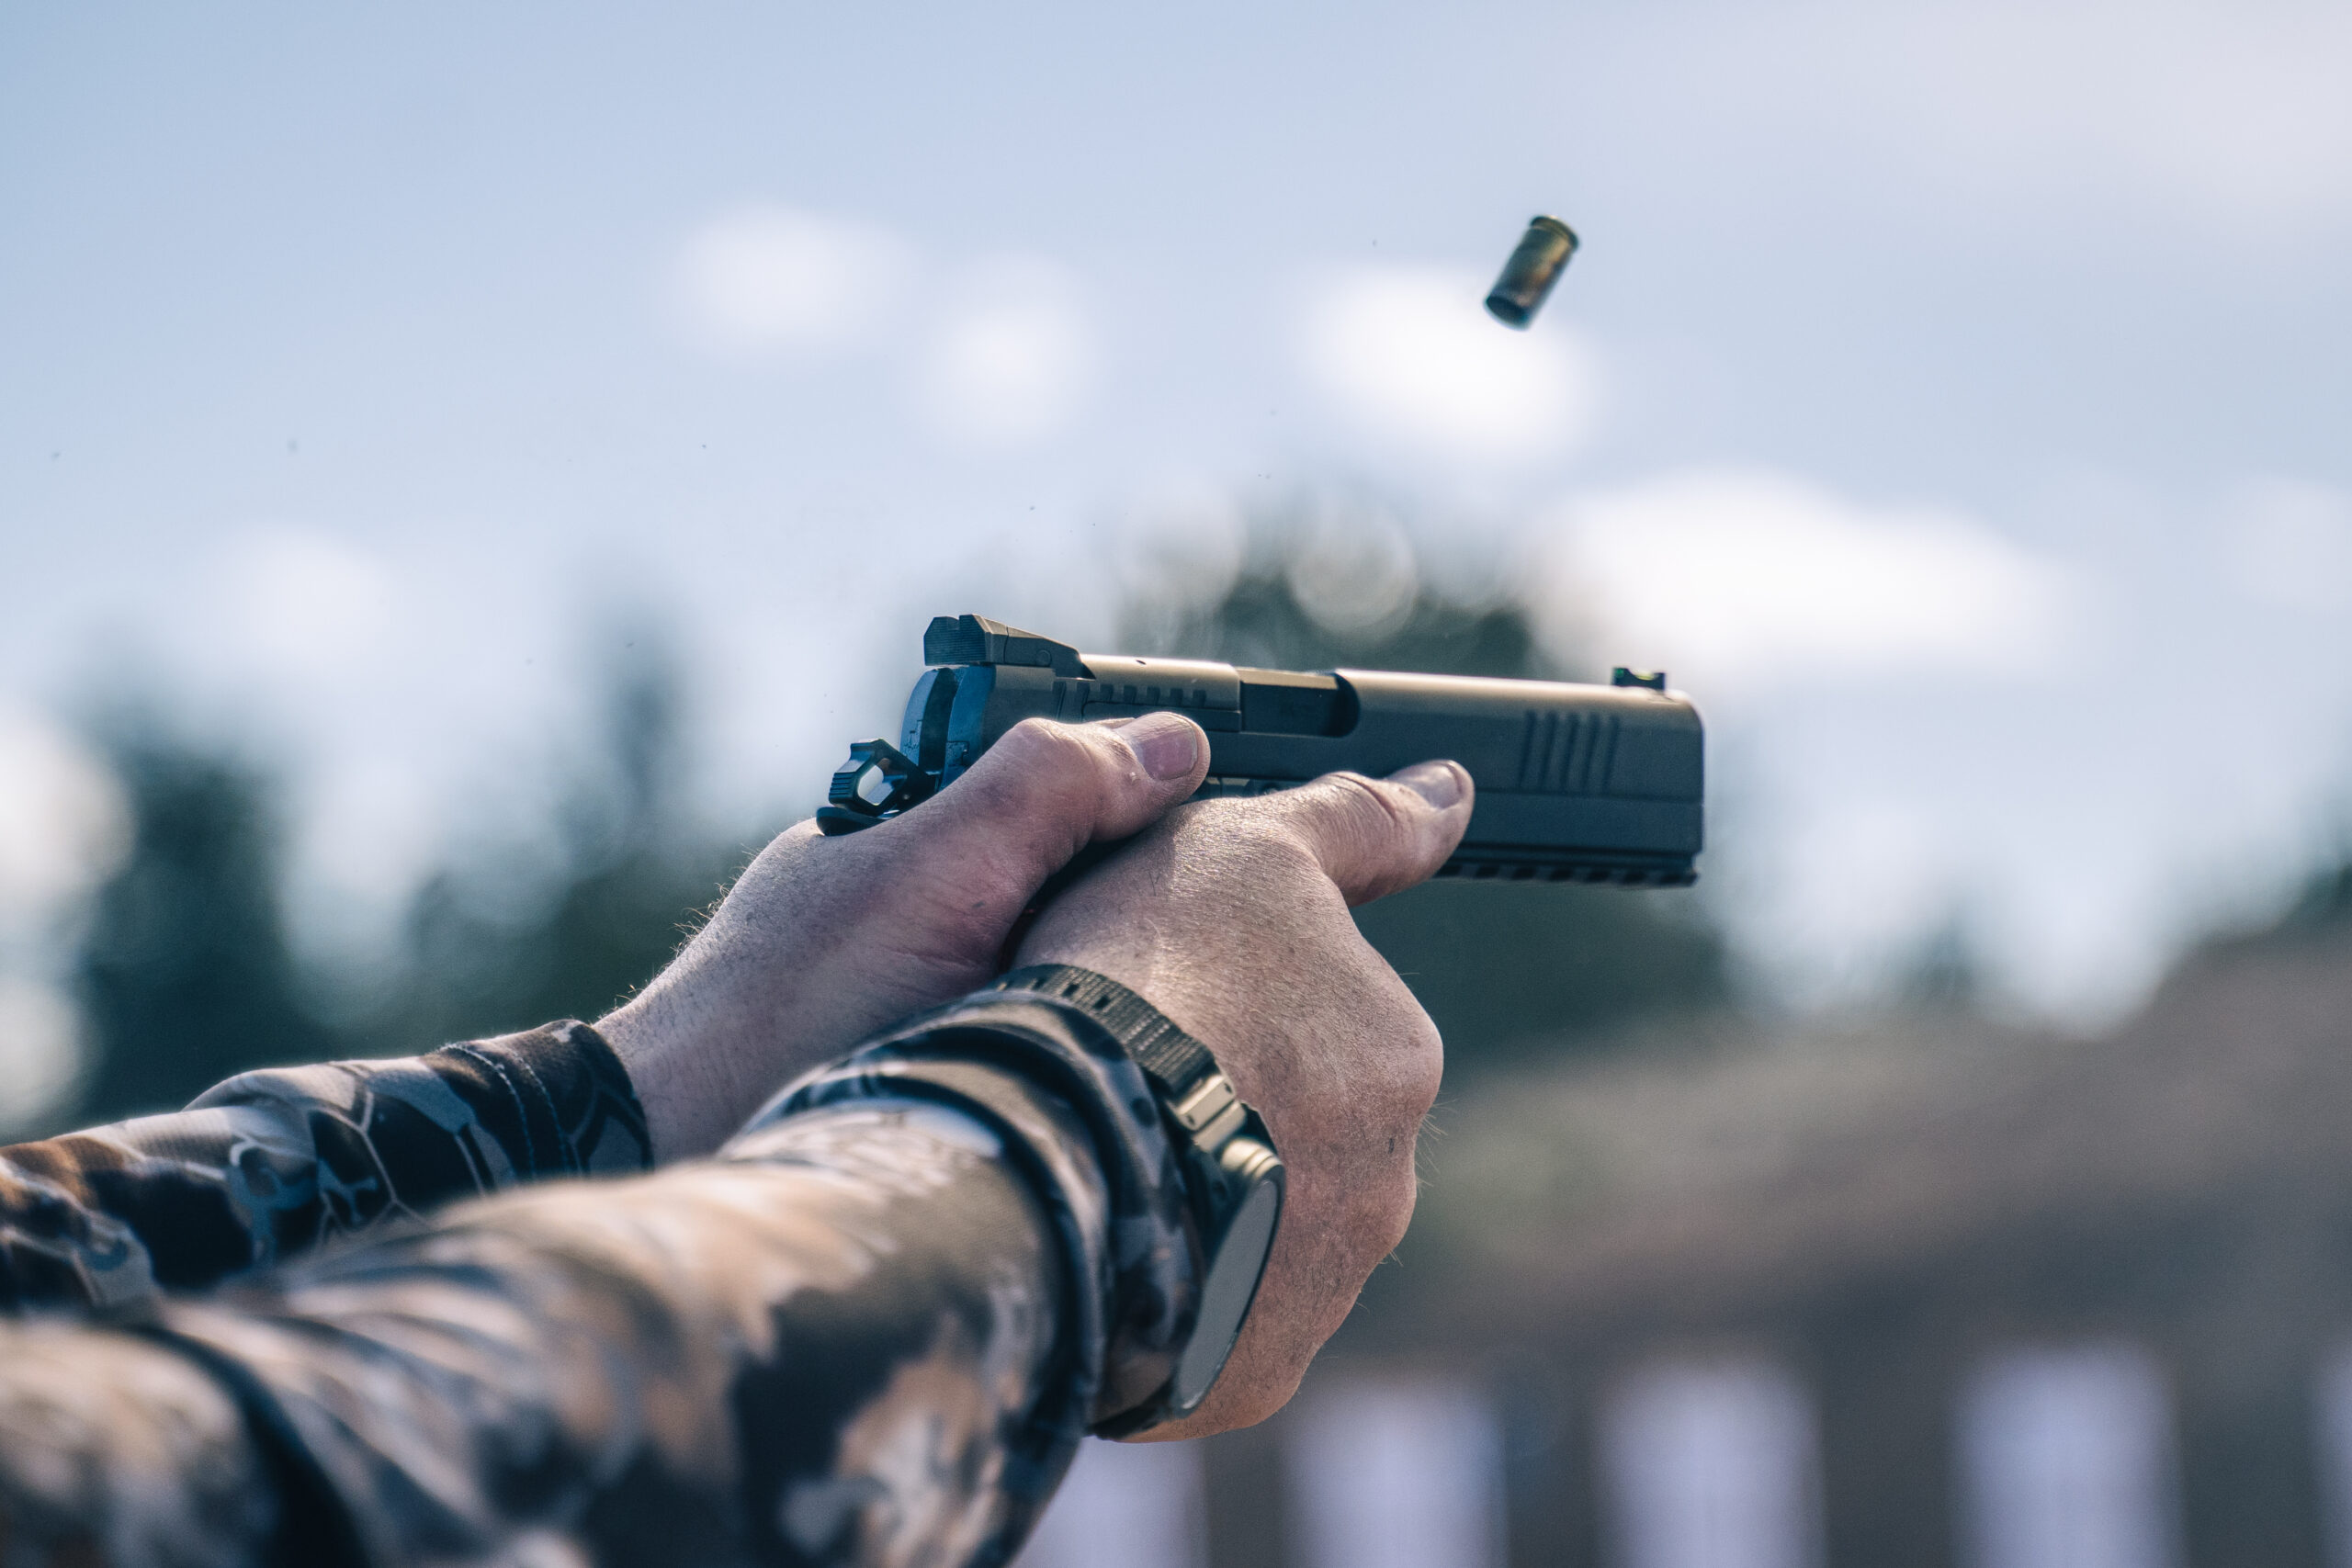 The best handguns of 2023 were tested by Outdoor Life at Gunsite.